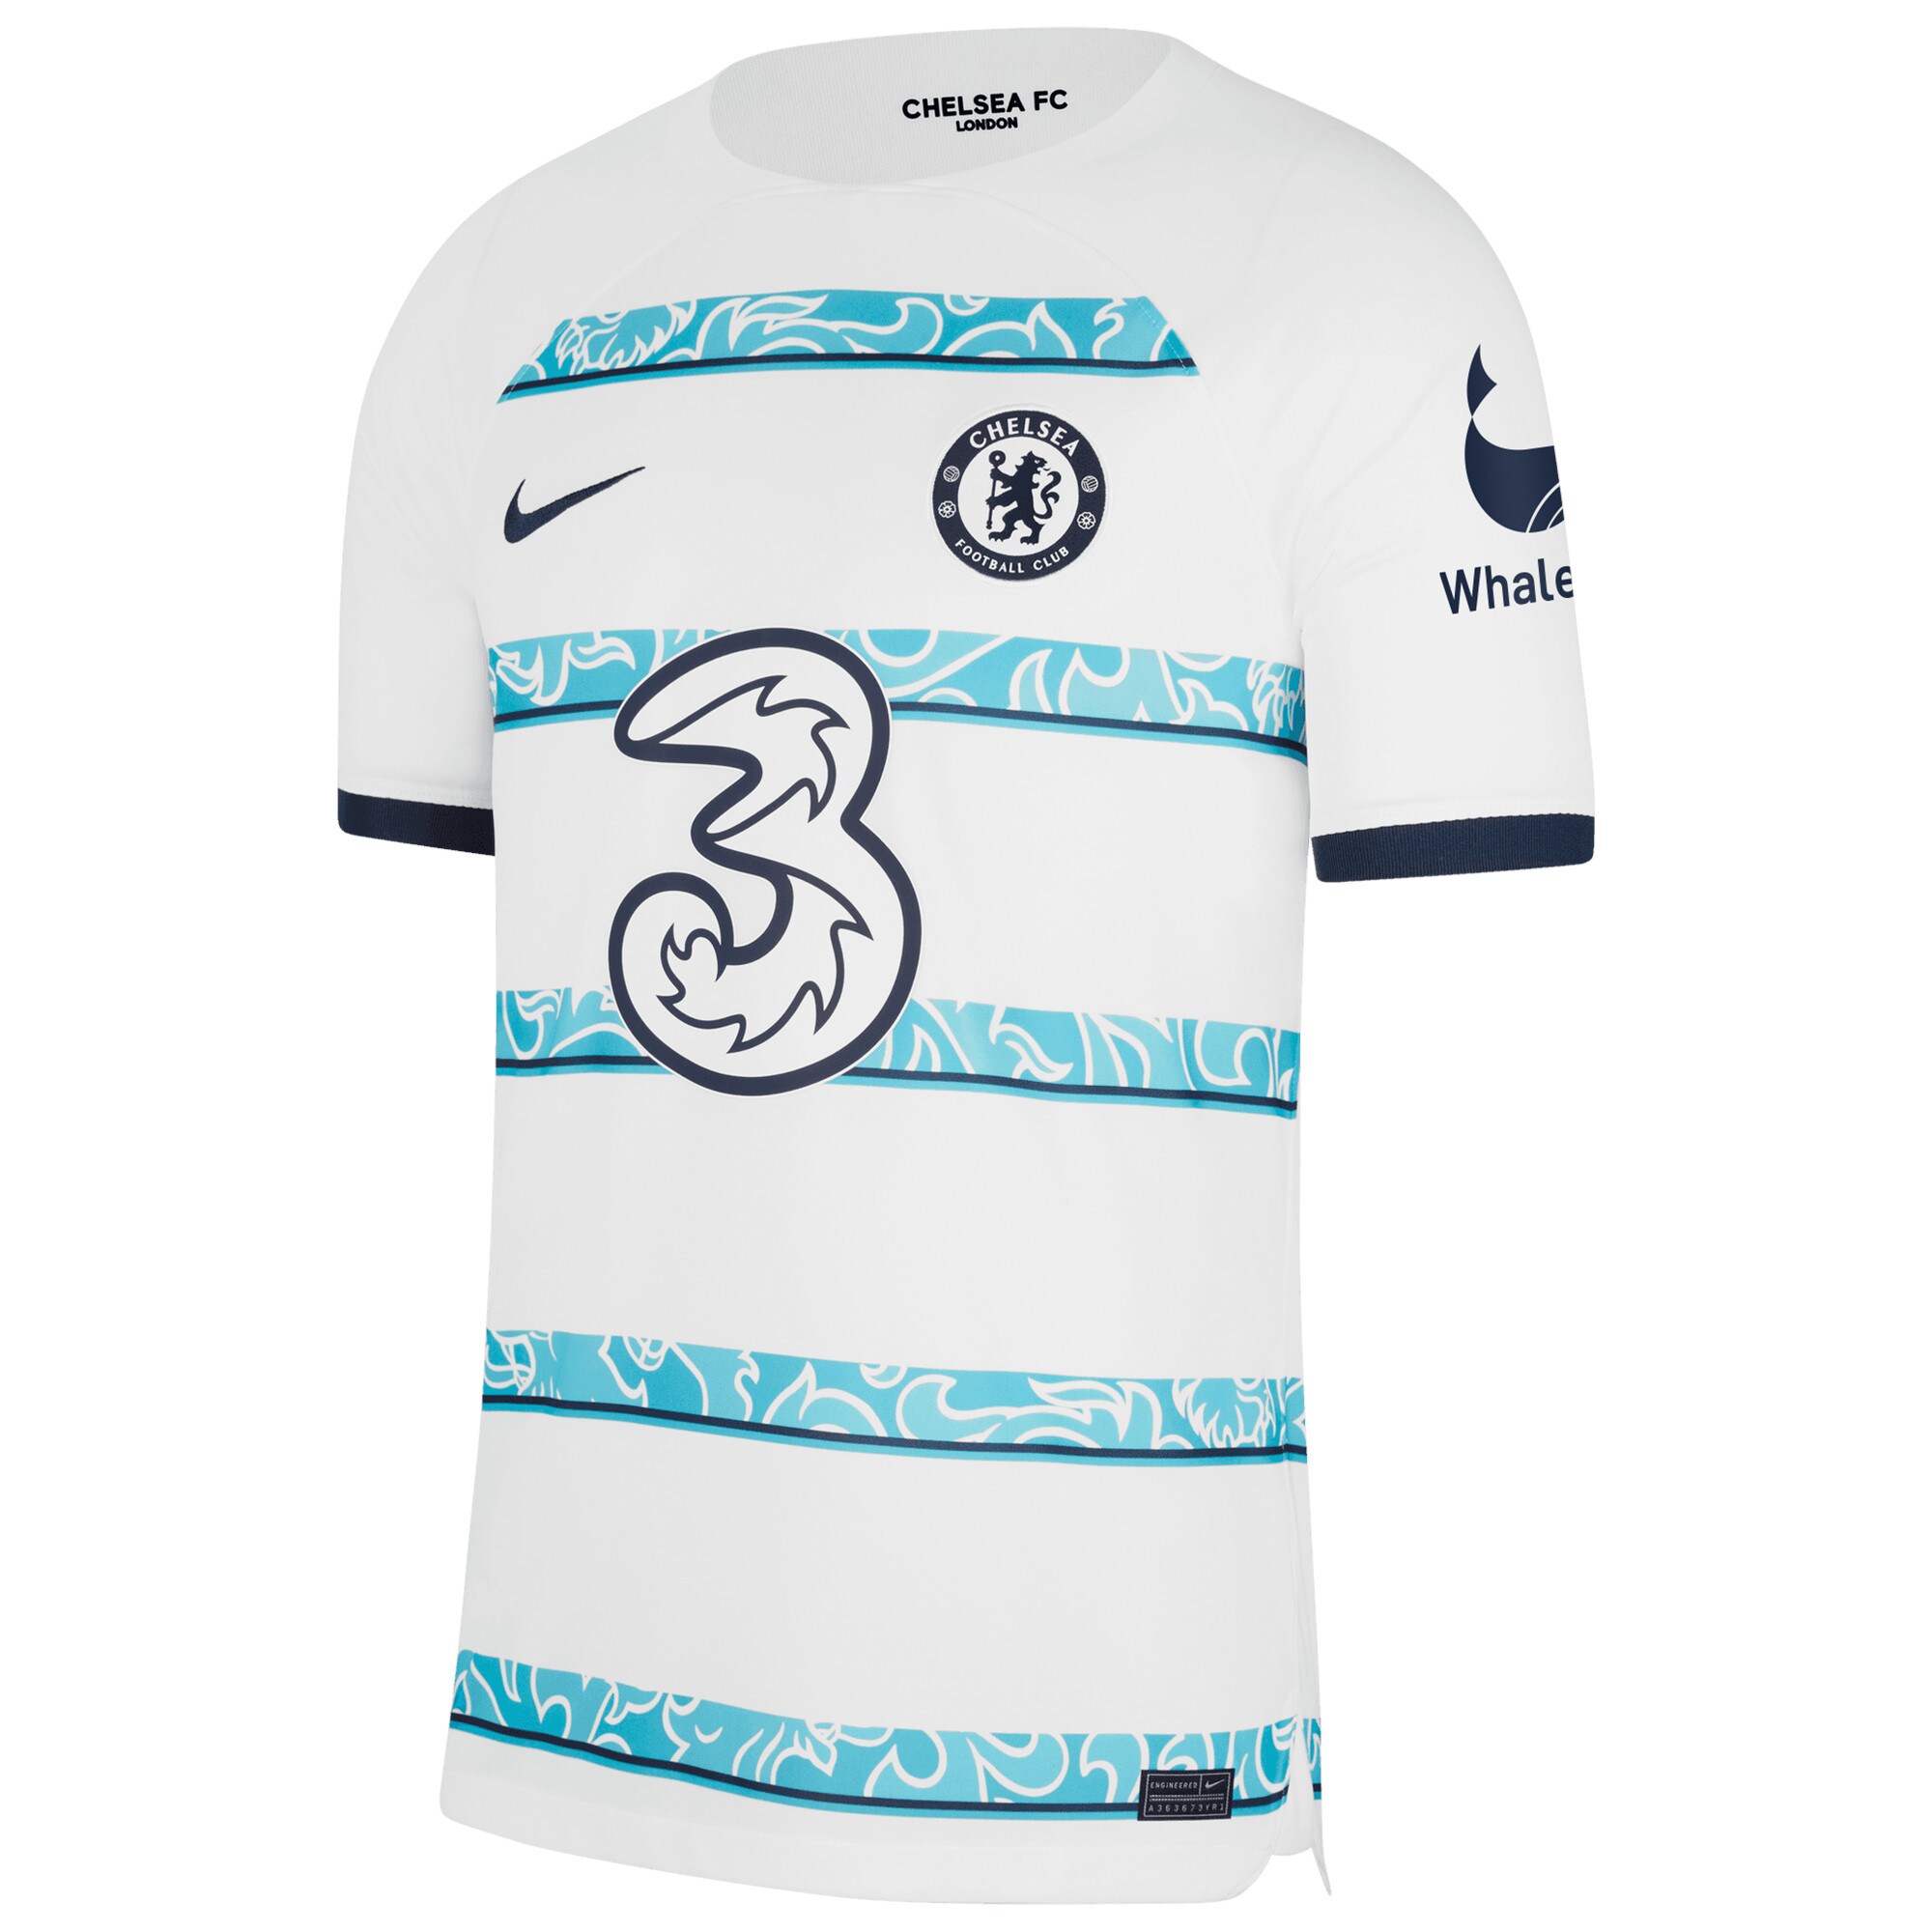 Chelsea Cup Away Stadium Shirt 2022-23 with Mudryk 15 printing